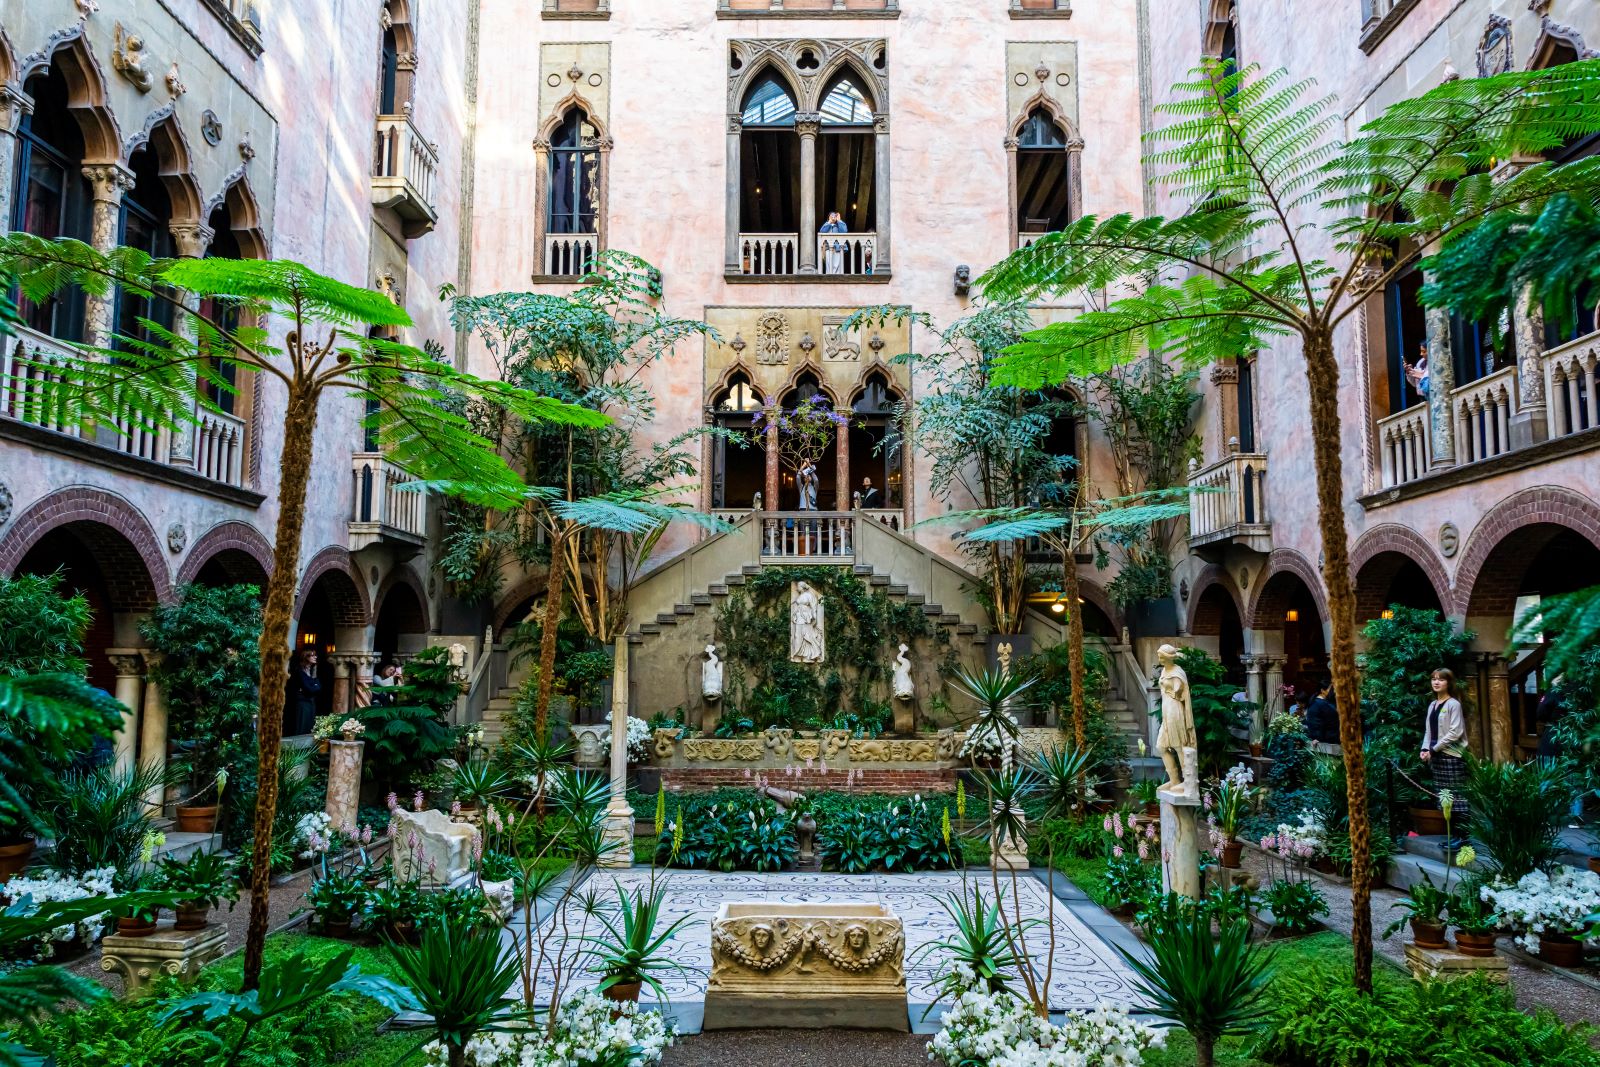 <p class="wp-caption-text">Image Credit: Shutterstock / LnP images</p>  <p>The Isabella Stewart Gardner Museum is home to an impressive collection of fine and decorative art housed in a building styled after a 15th-century Venetian palace.</p>